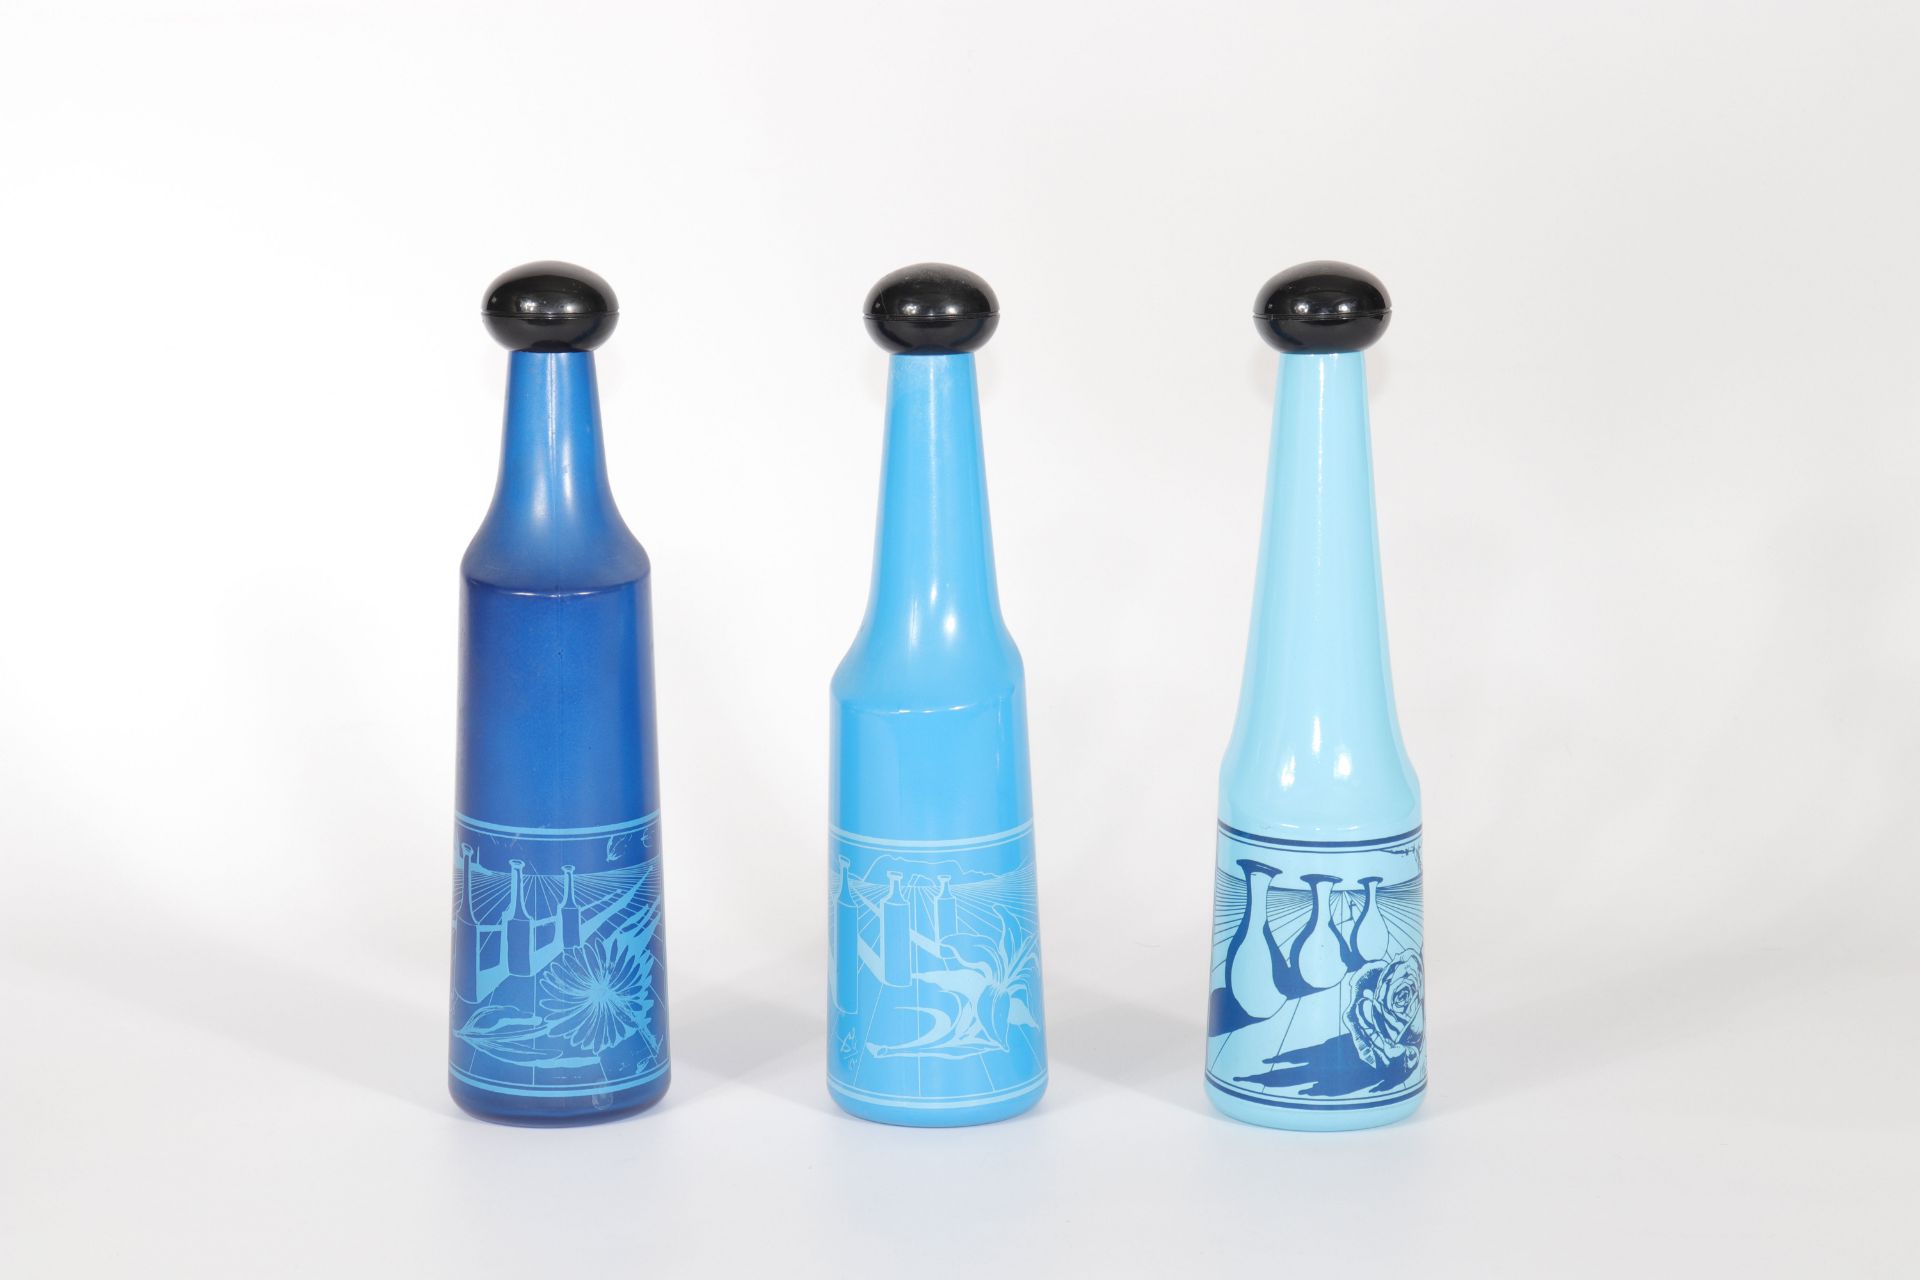 Salvador Dali. "Botellas de vino". 1970-1972. Suite of three glass bottles each decorated with a dif